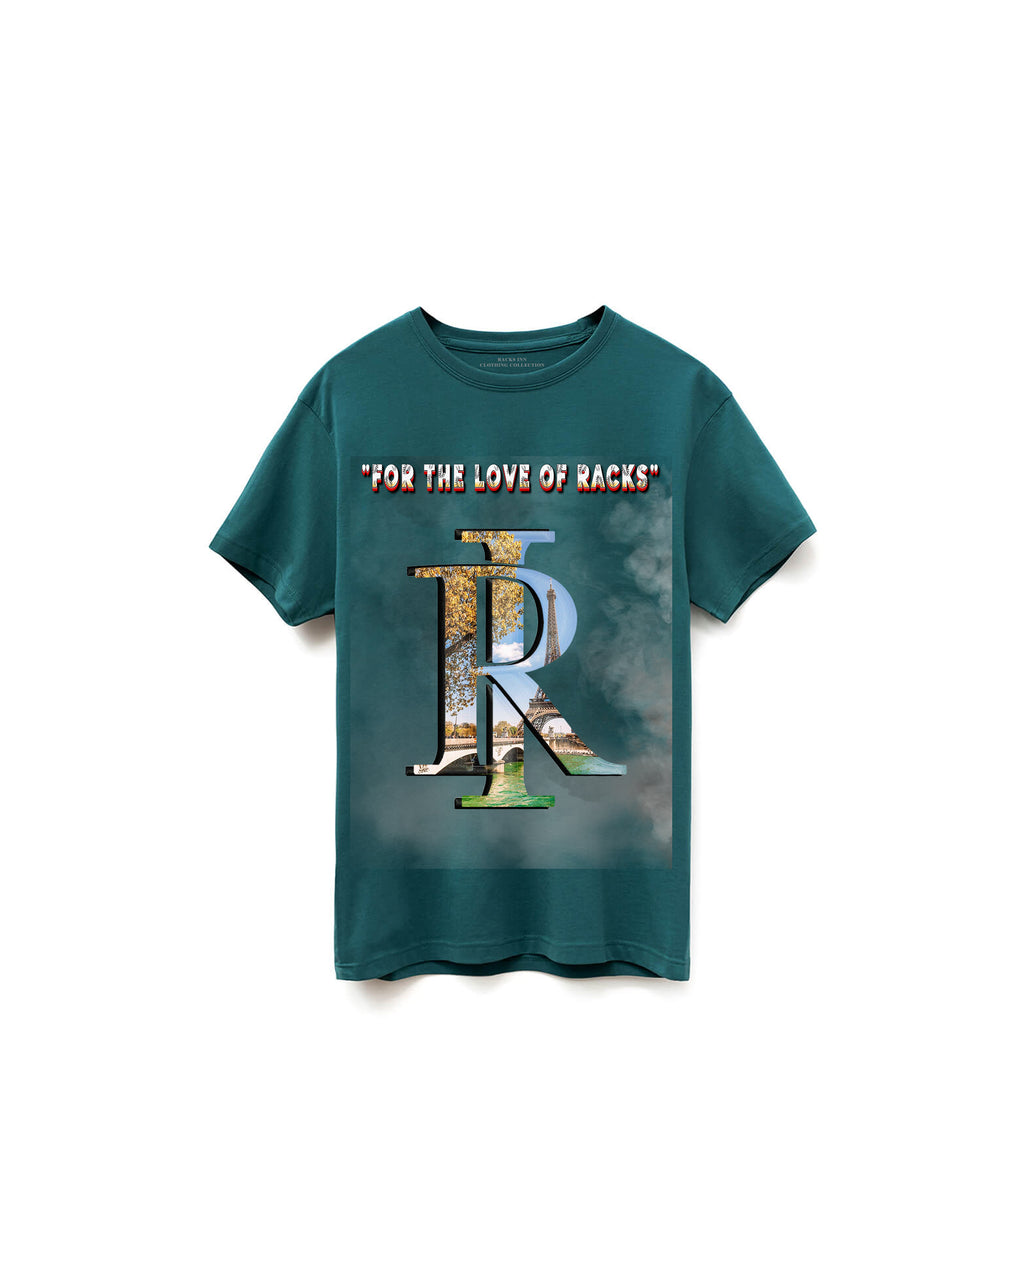 For The Love of Racks T-Shirt - Teal